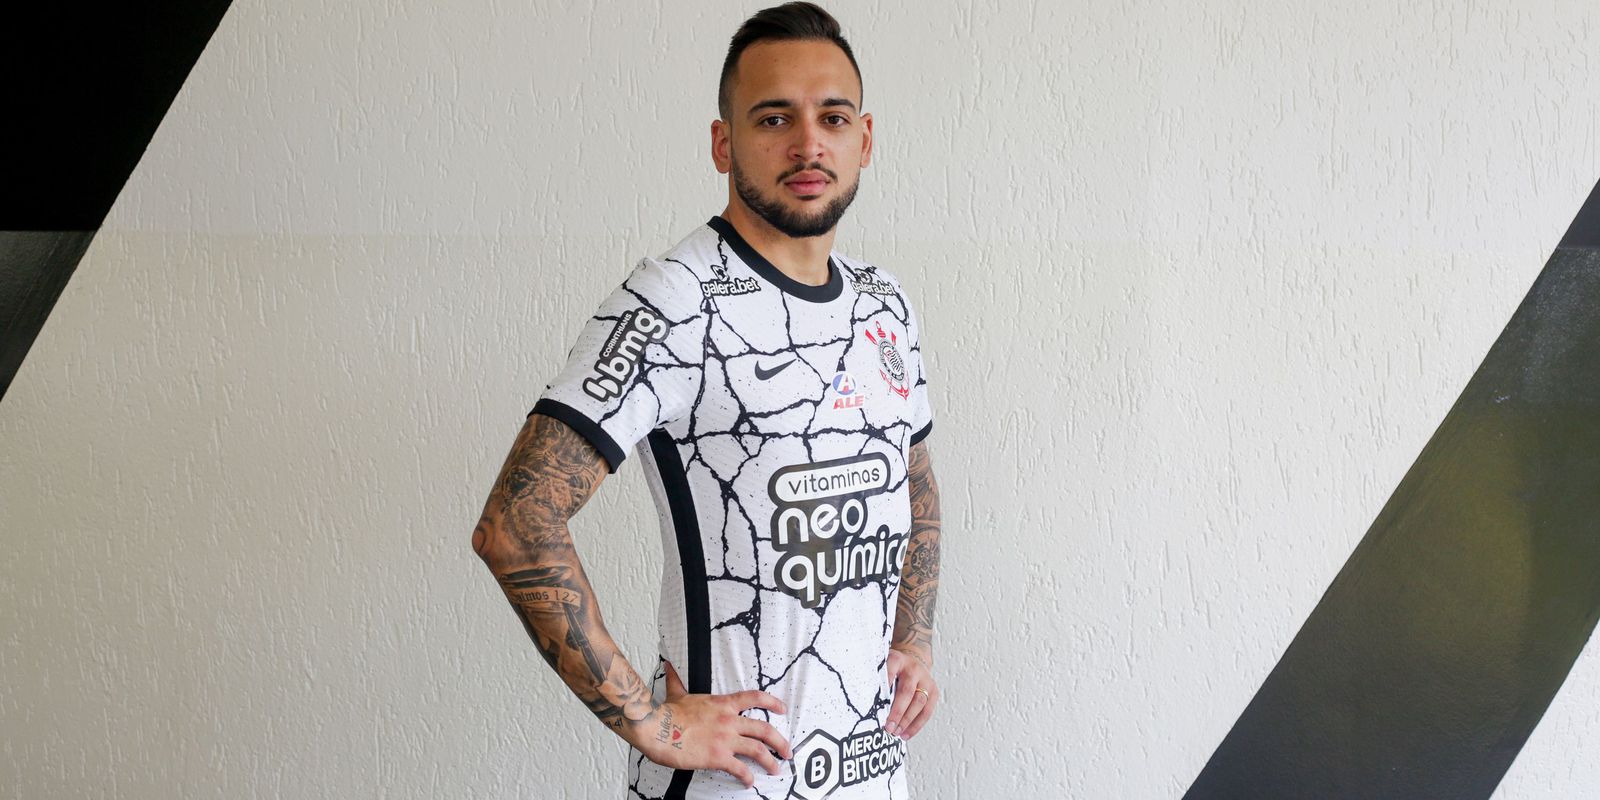 After fleeing the War in Ukraine, Maycon is presented by Corinthians